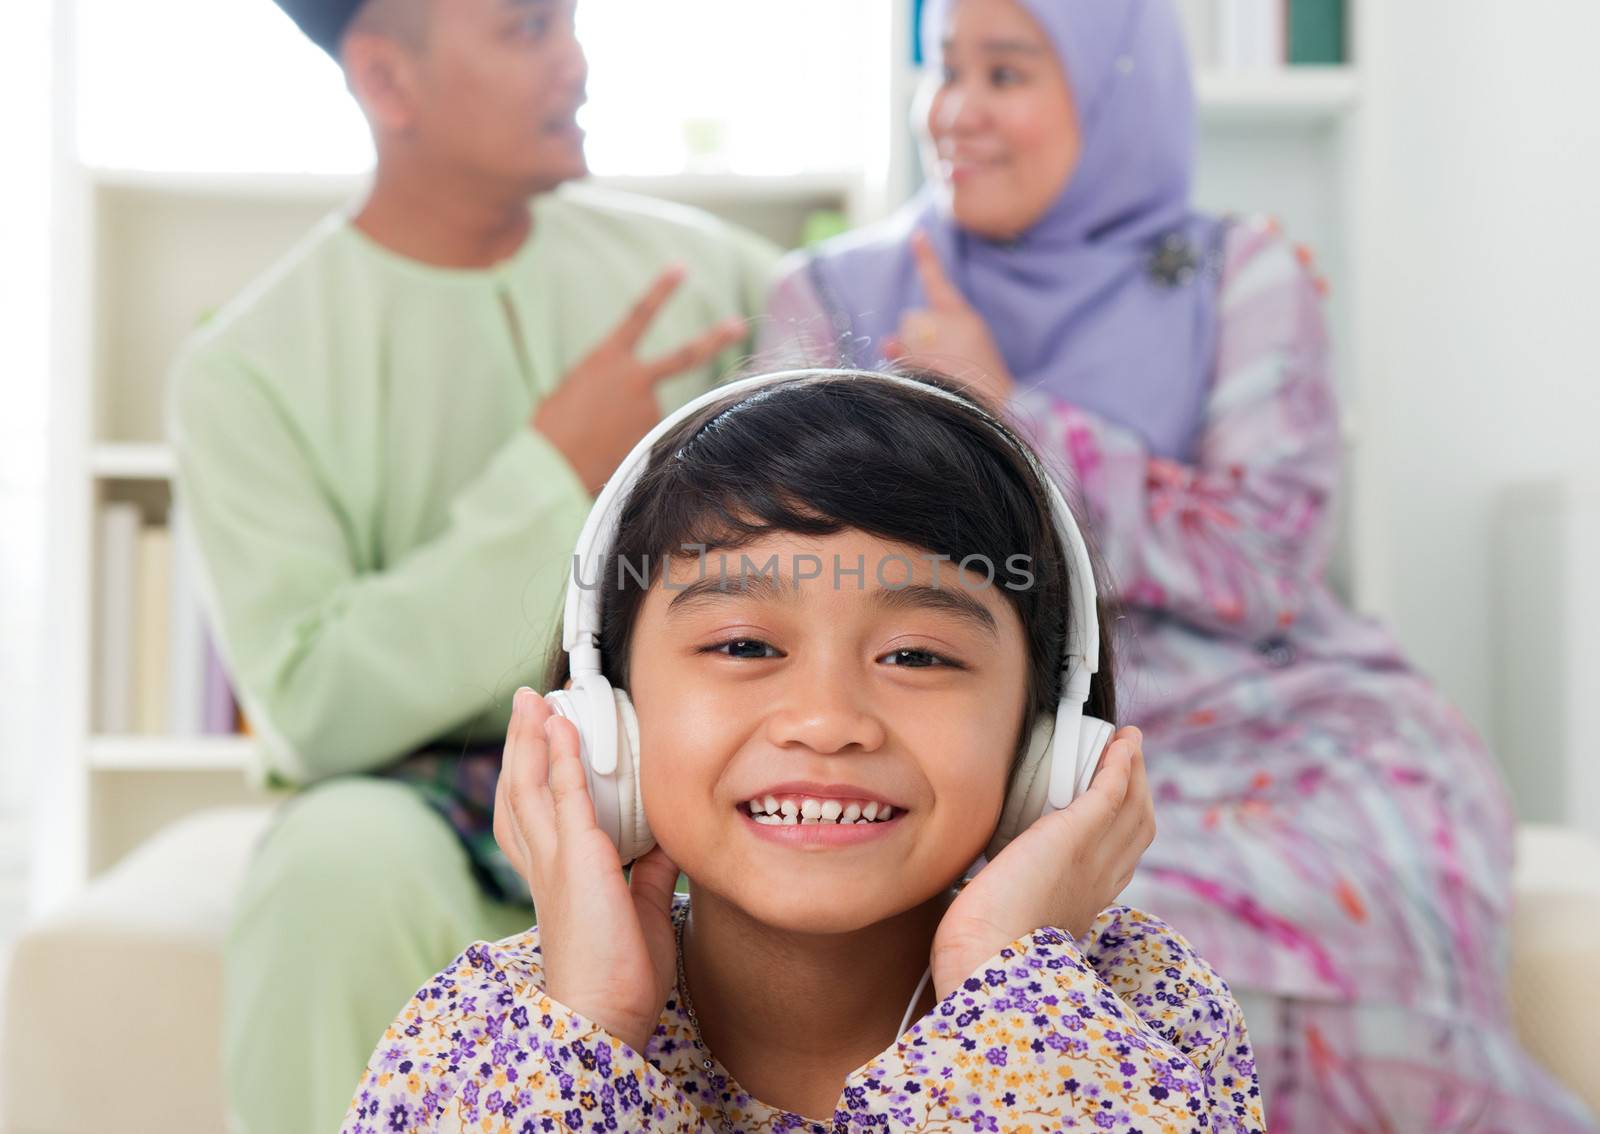 Muslim girl listening to song at home. Southeast Asian family living lifestyle. Happy smiling Malay parents and child.